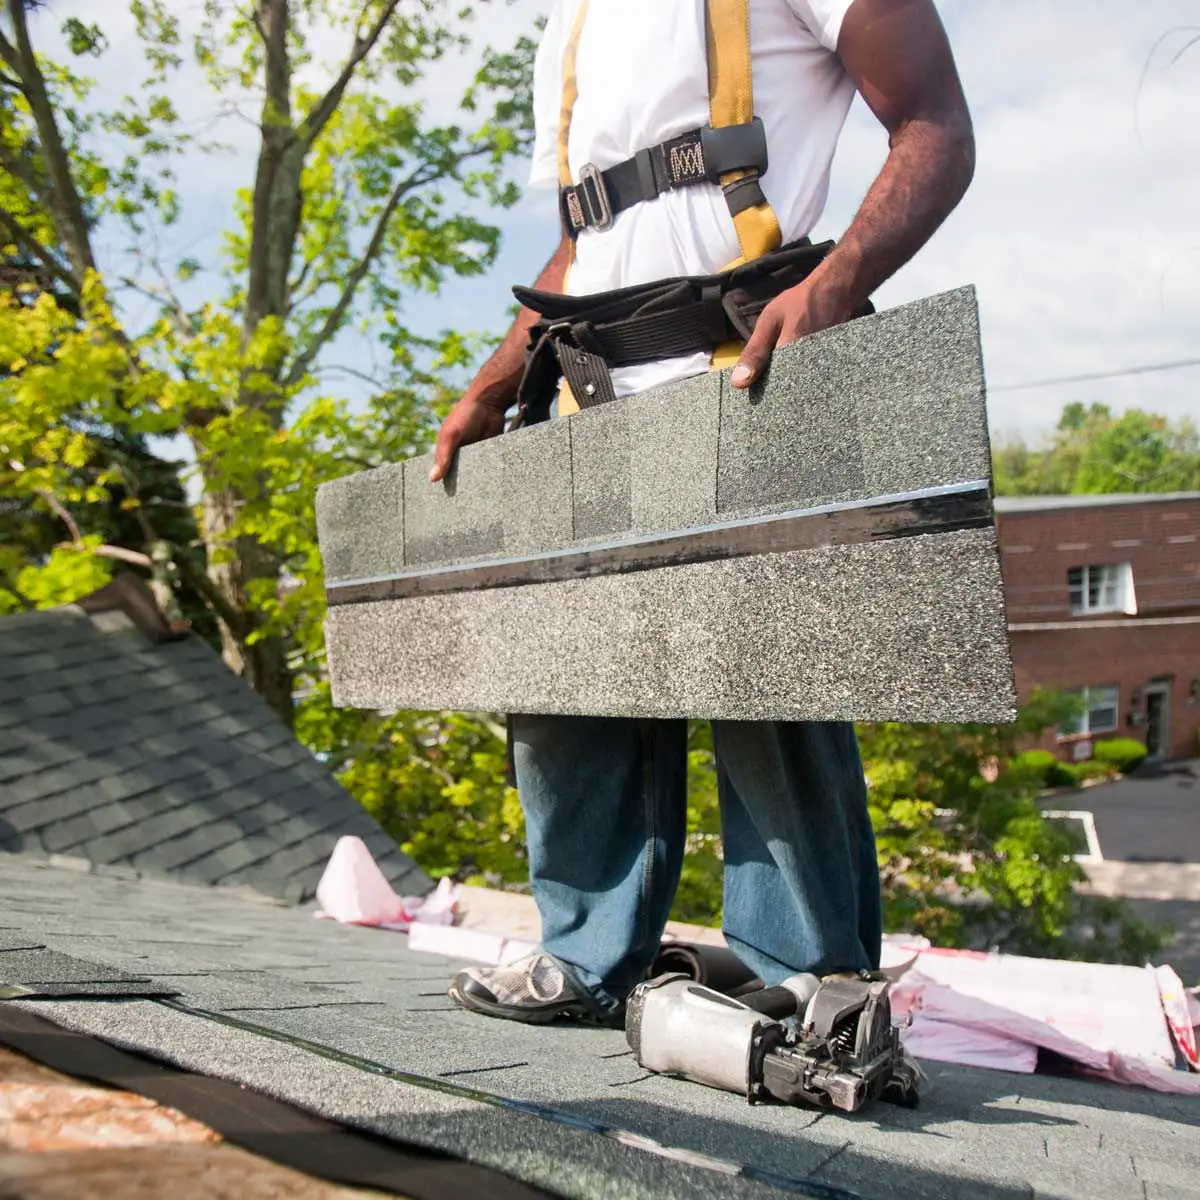 How Long Do Shingle Roofs Last In Florida